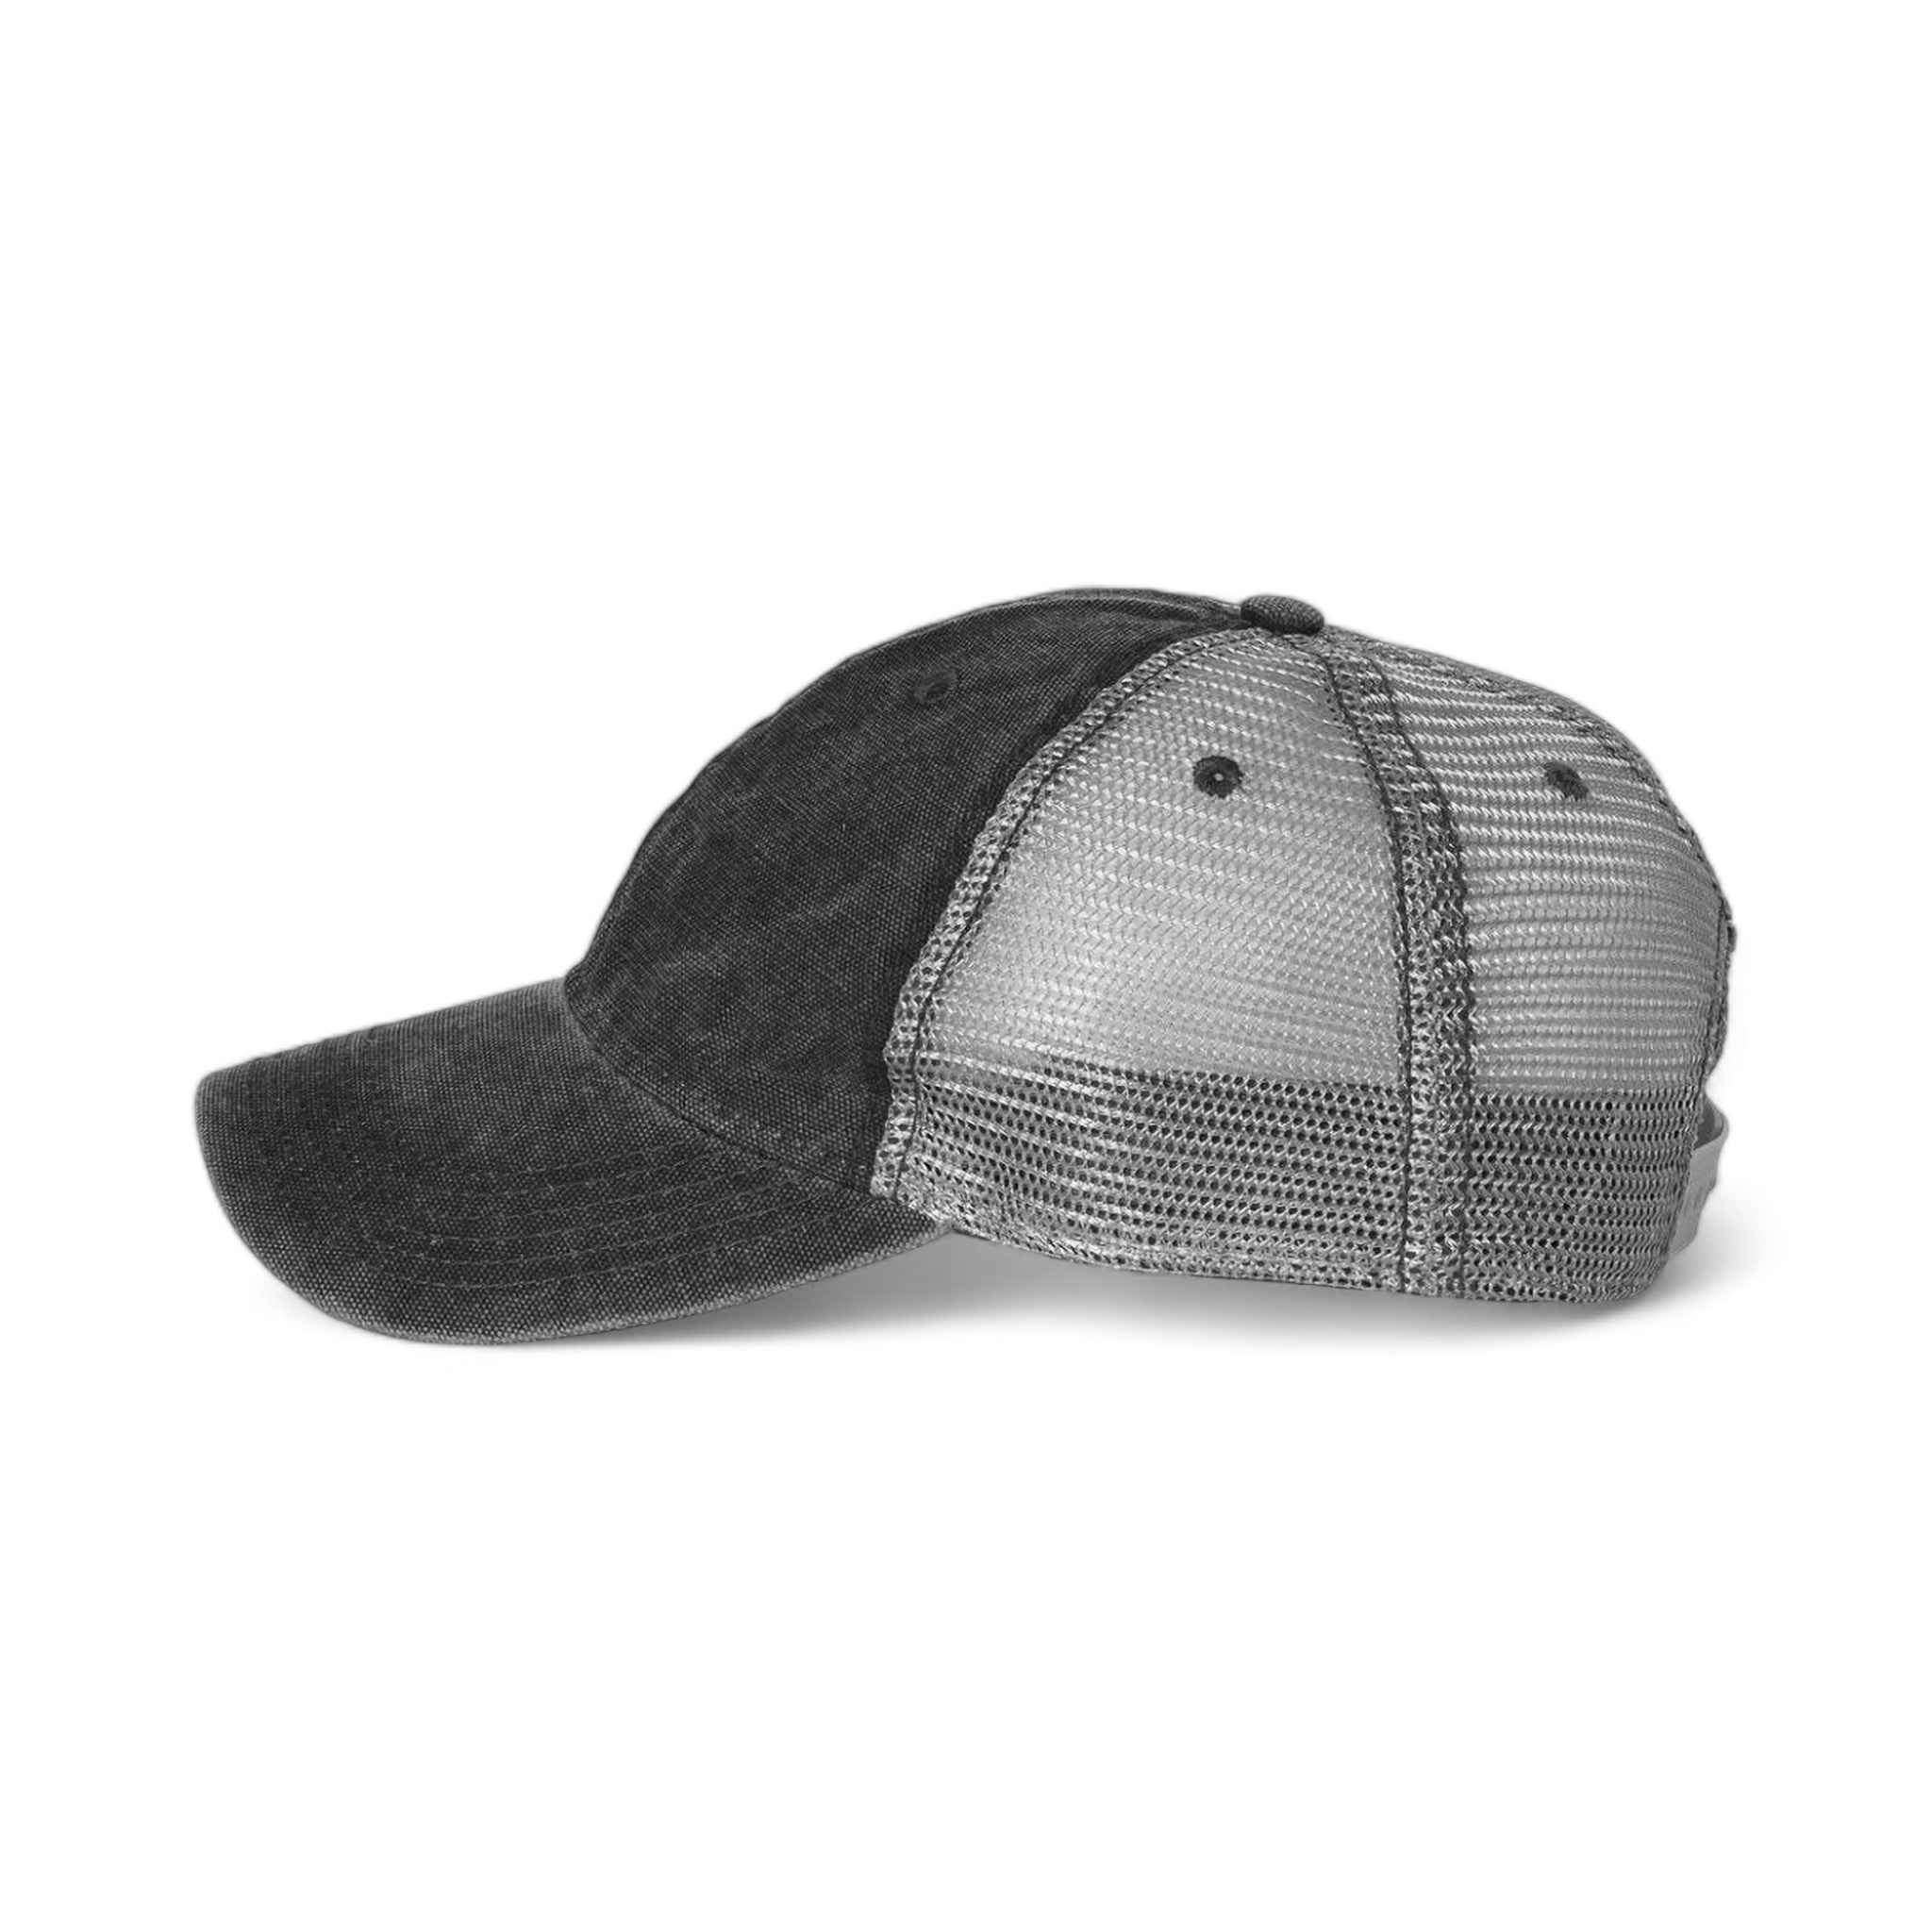 Side view of LEGACY DTA custom hat in black and grey